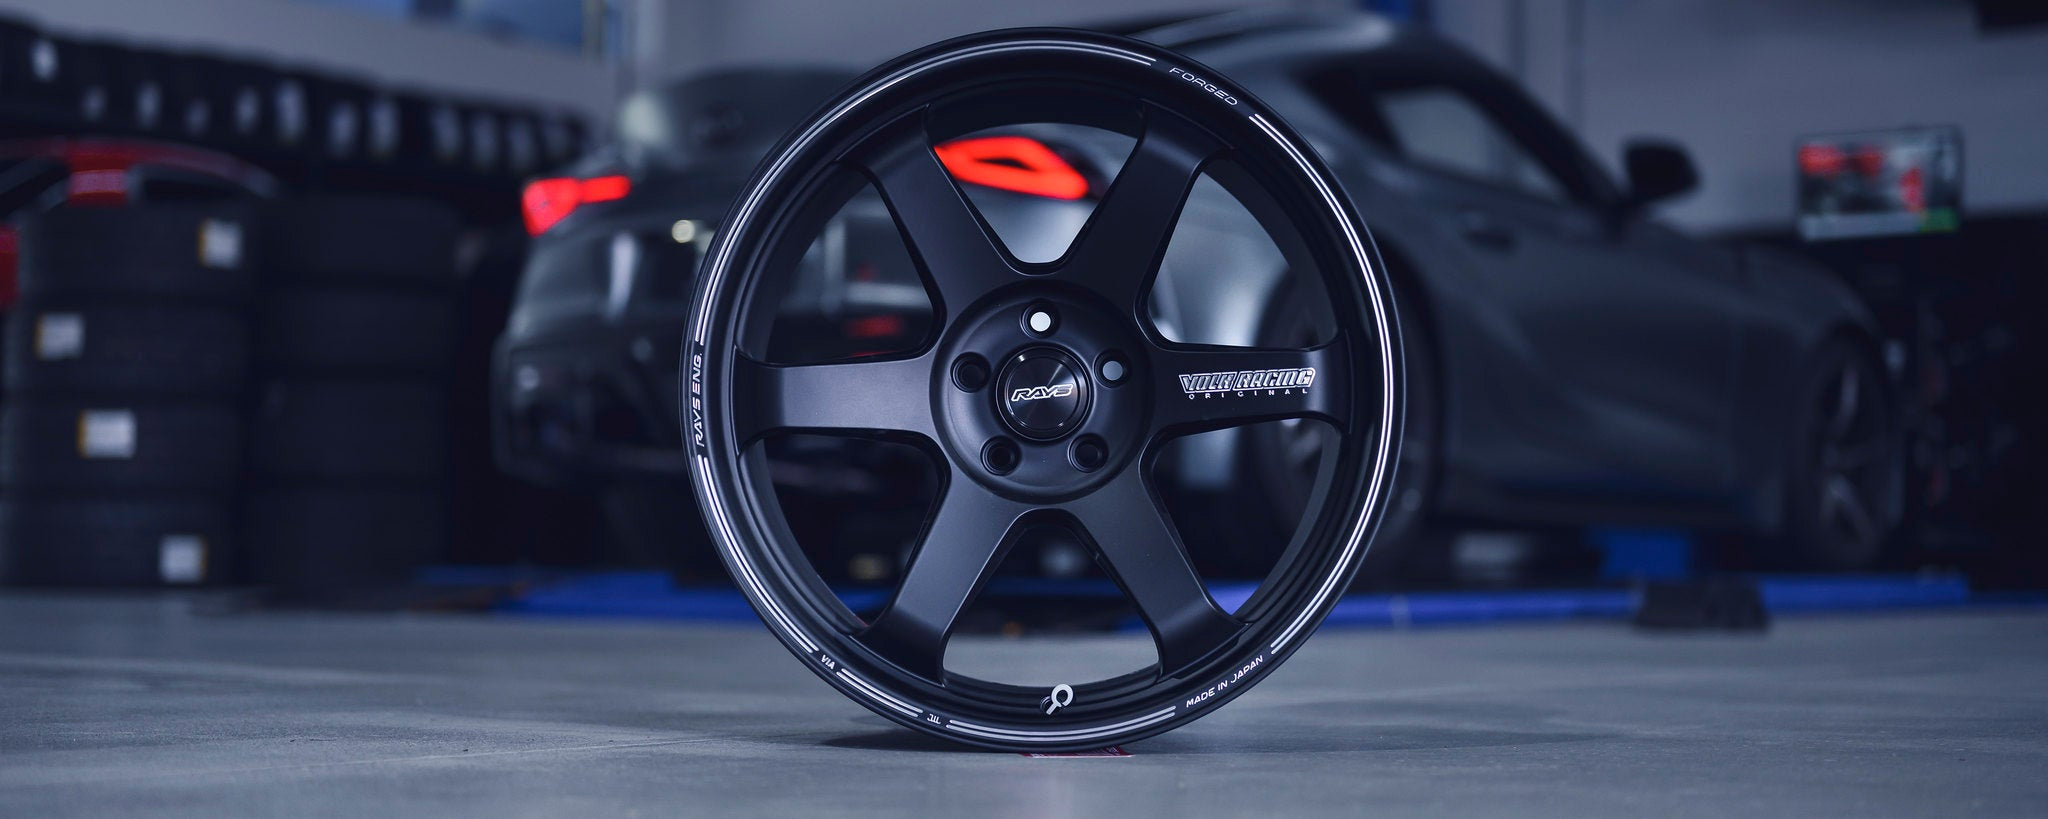 Volk Racing TE37 Ultra Track Edition II R35 GT-R - Premium Wheels from Volk Racing - From just $6890.0! Shop now at MK MOTORSPORTS